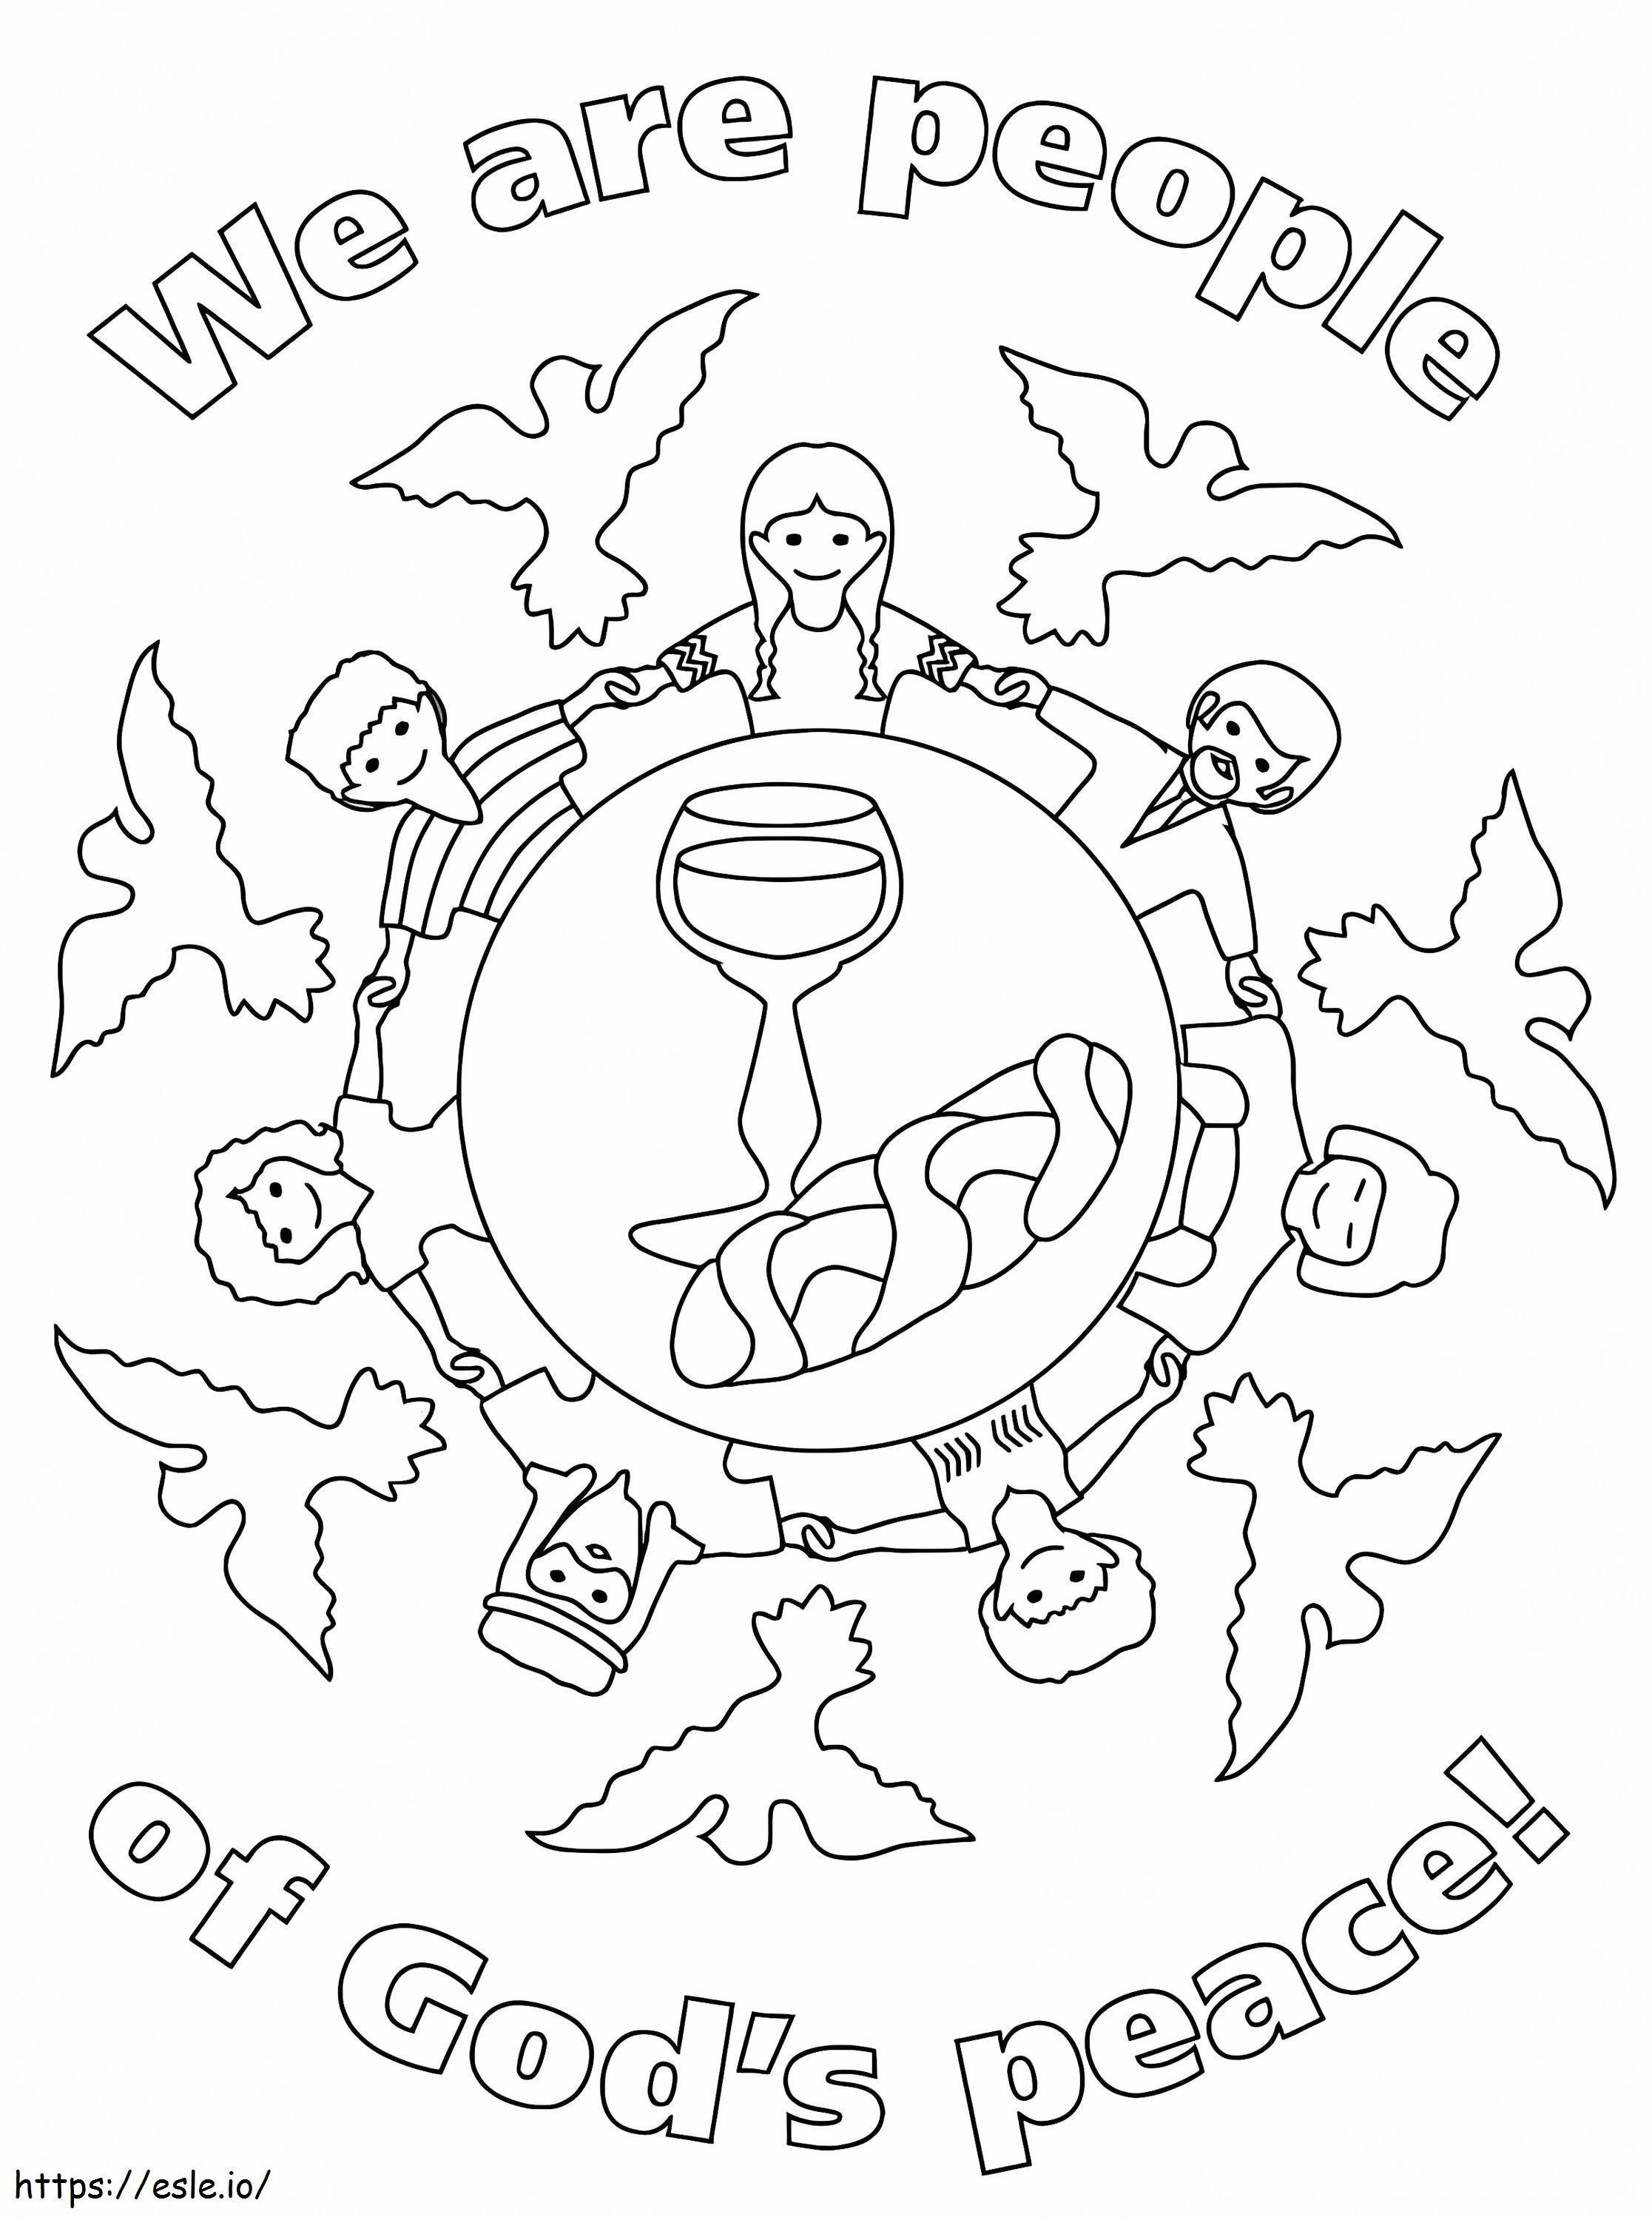 Gods Peace Bible coloring page